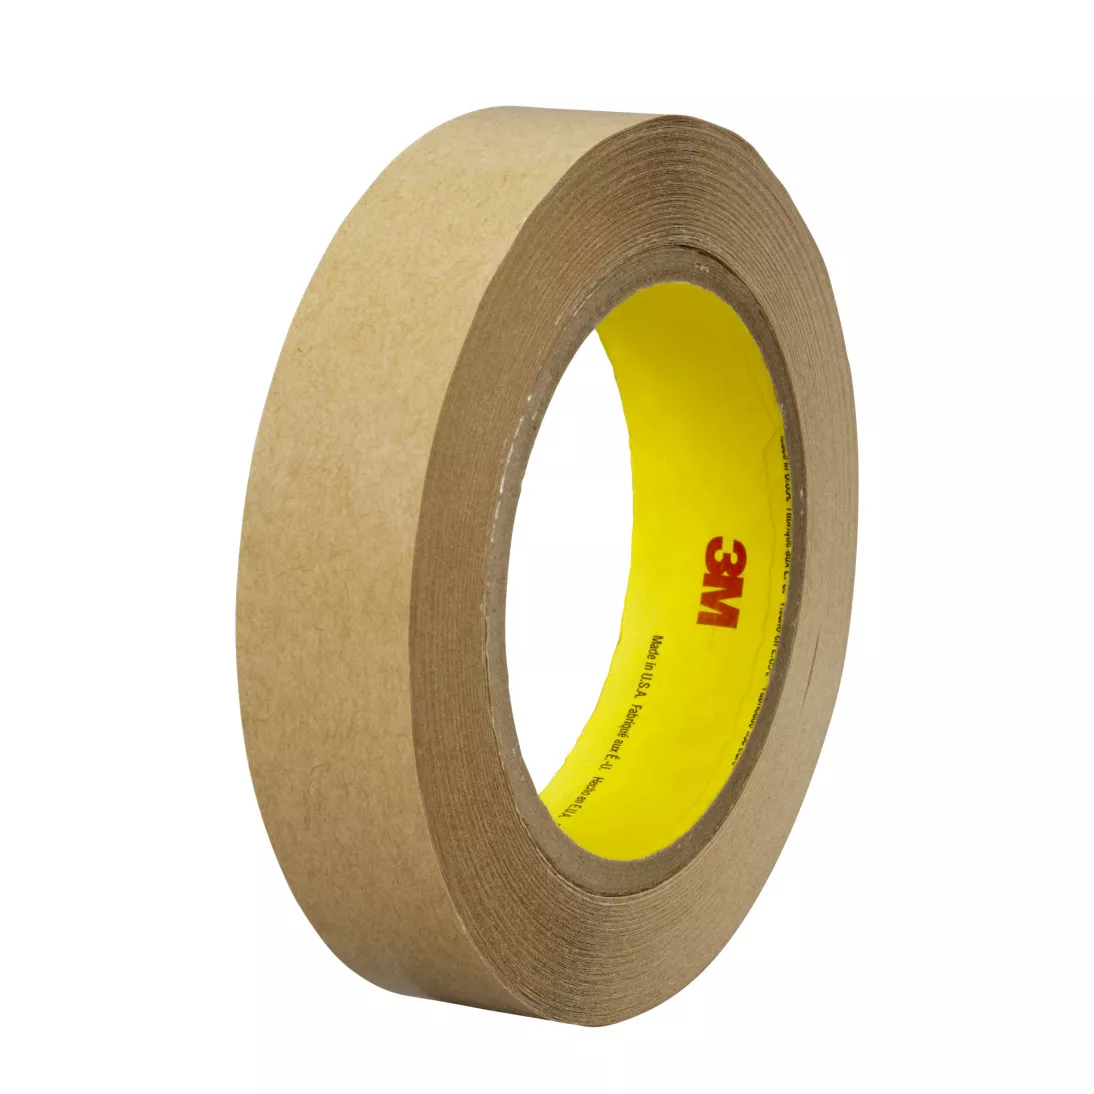 3M™ Adhesive Transfer Tape Extended Liner 9934XL, Translucent, 3/4 in x
120 yd, 4 mil, 48 rolls per case